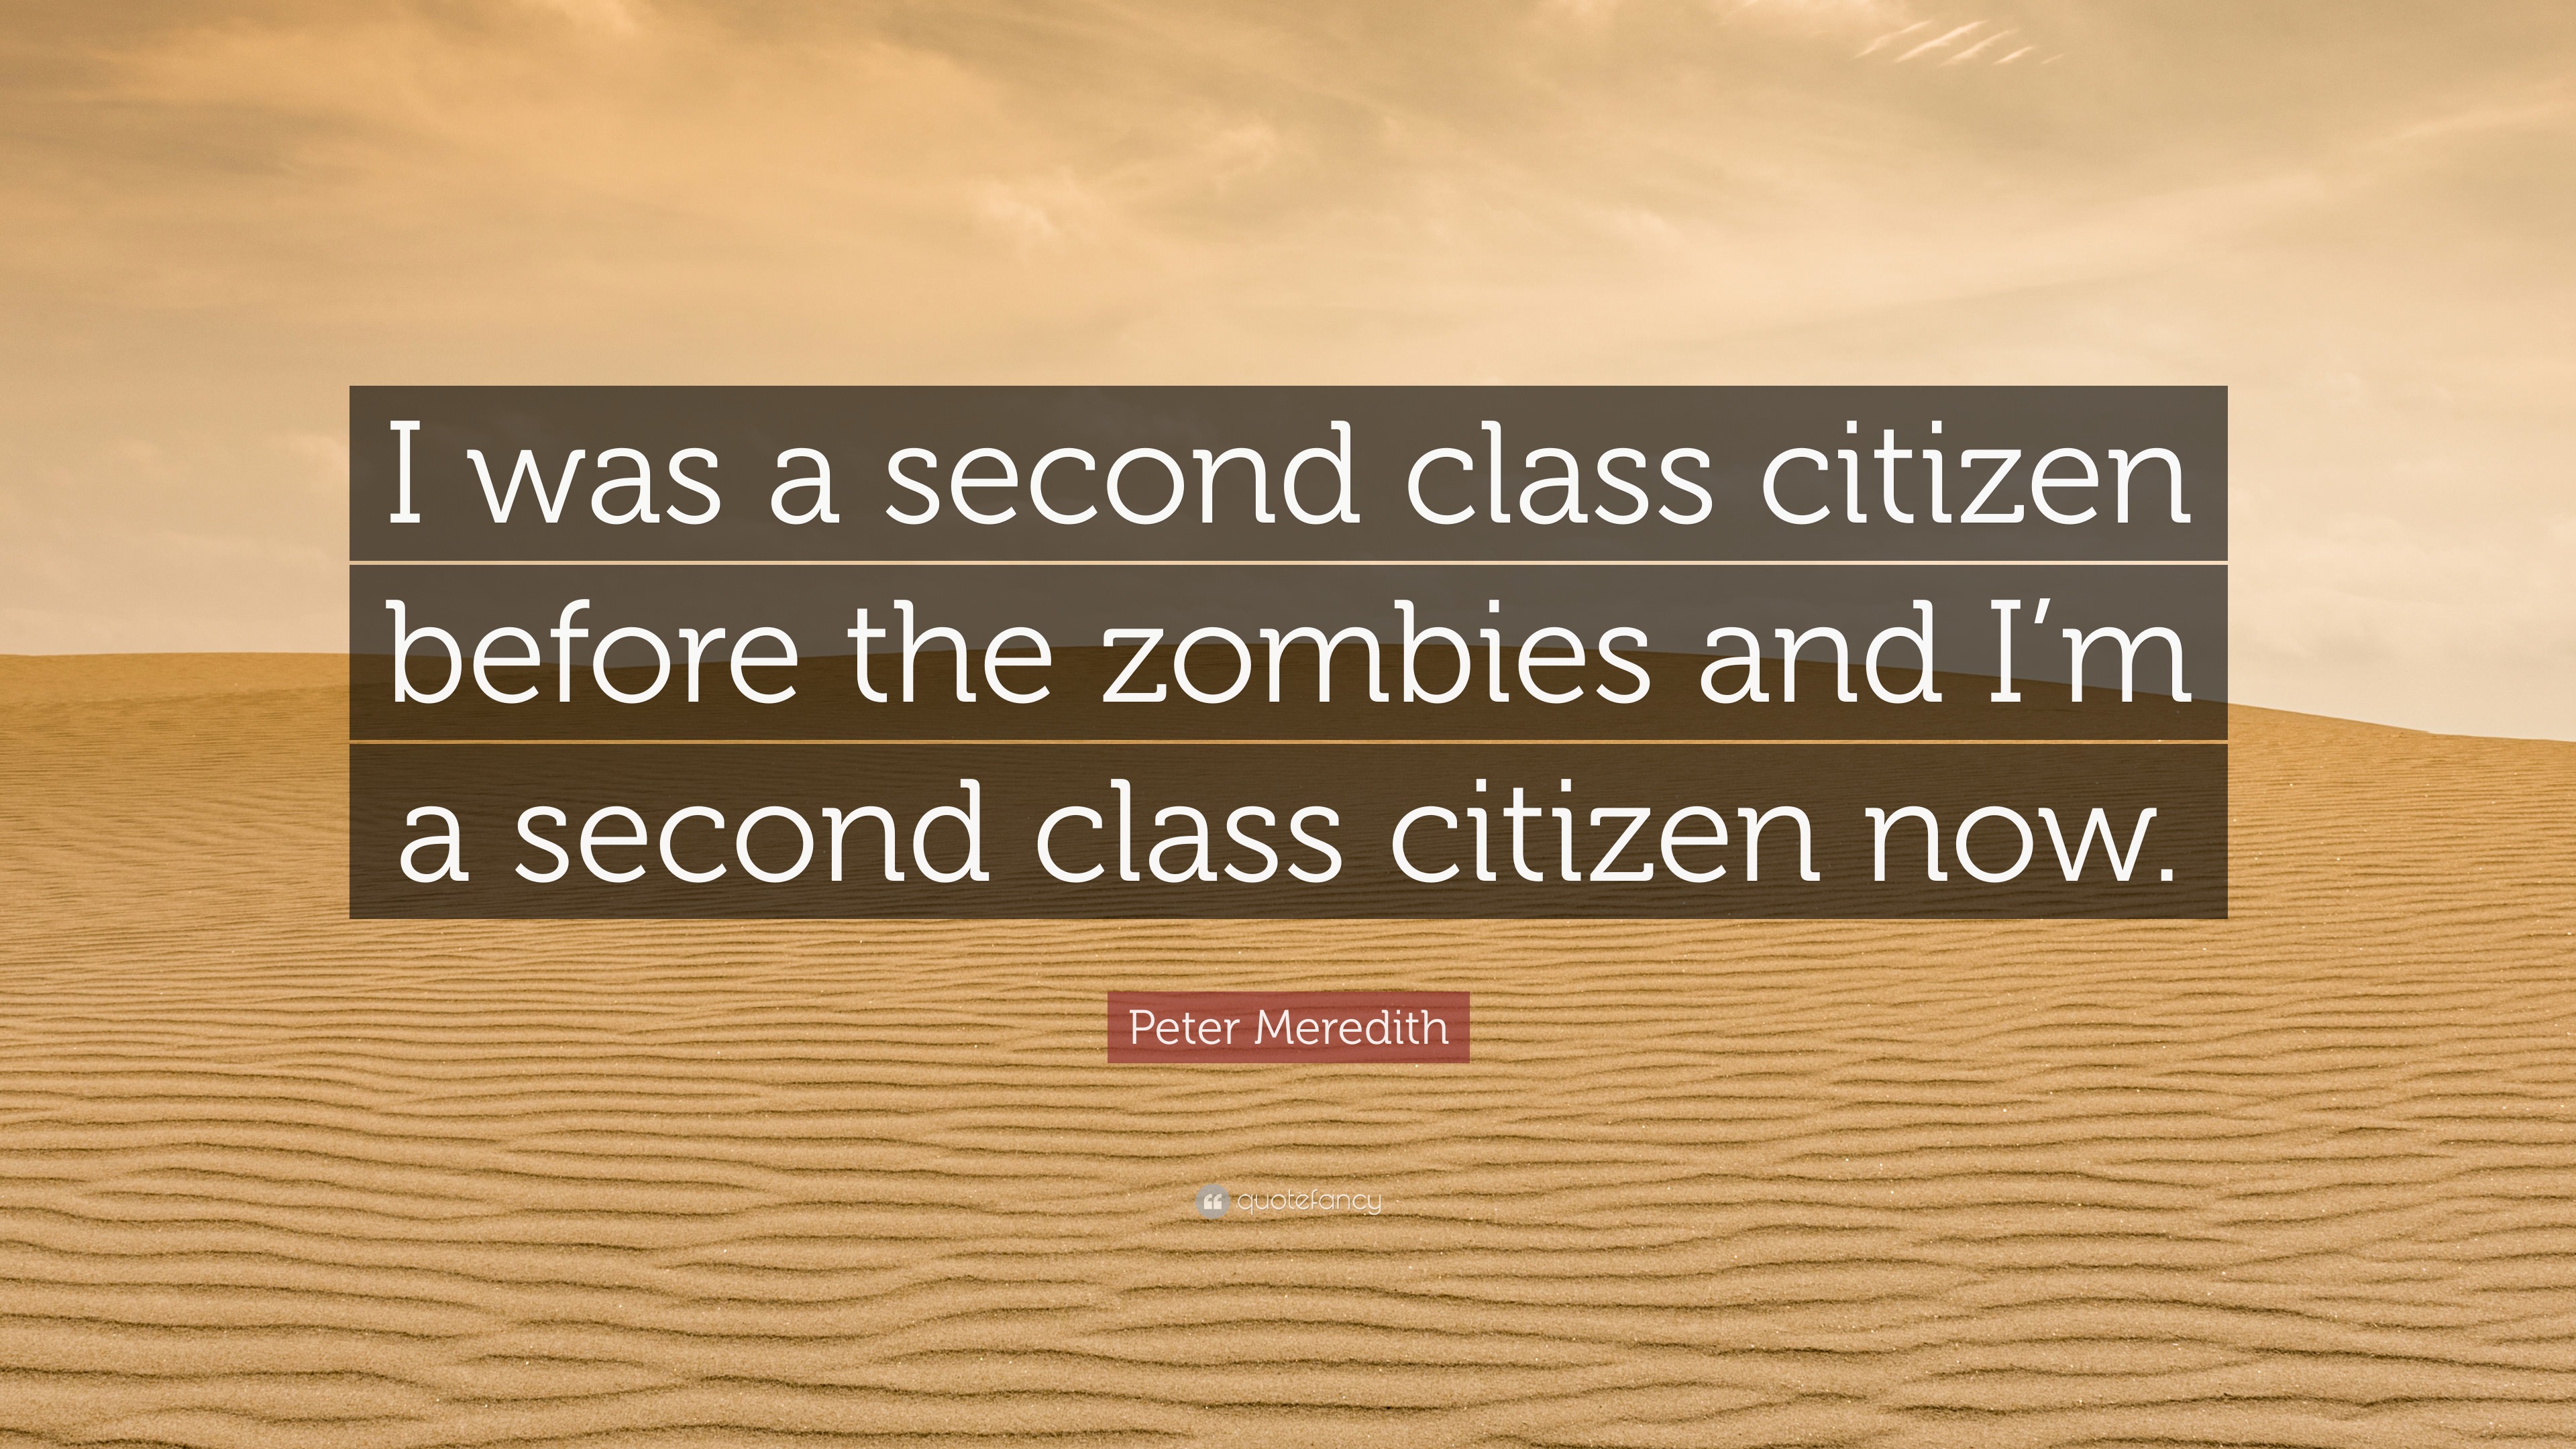 Peter Meredith Quote: “I was a second class citizen before the zombies and  I'm a